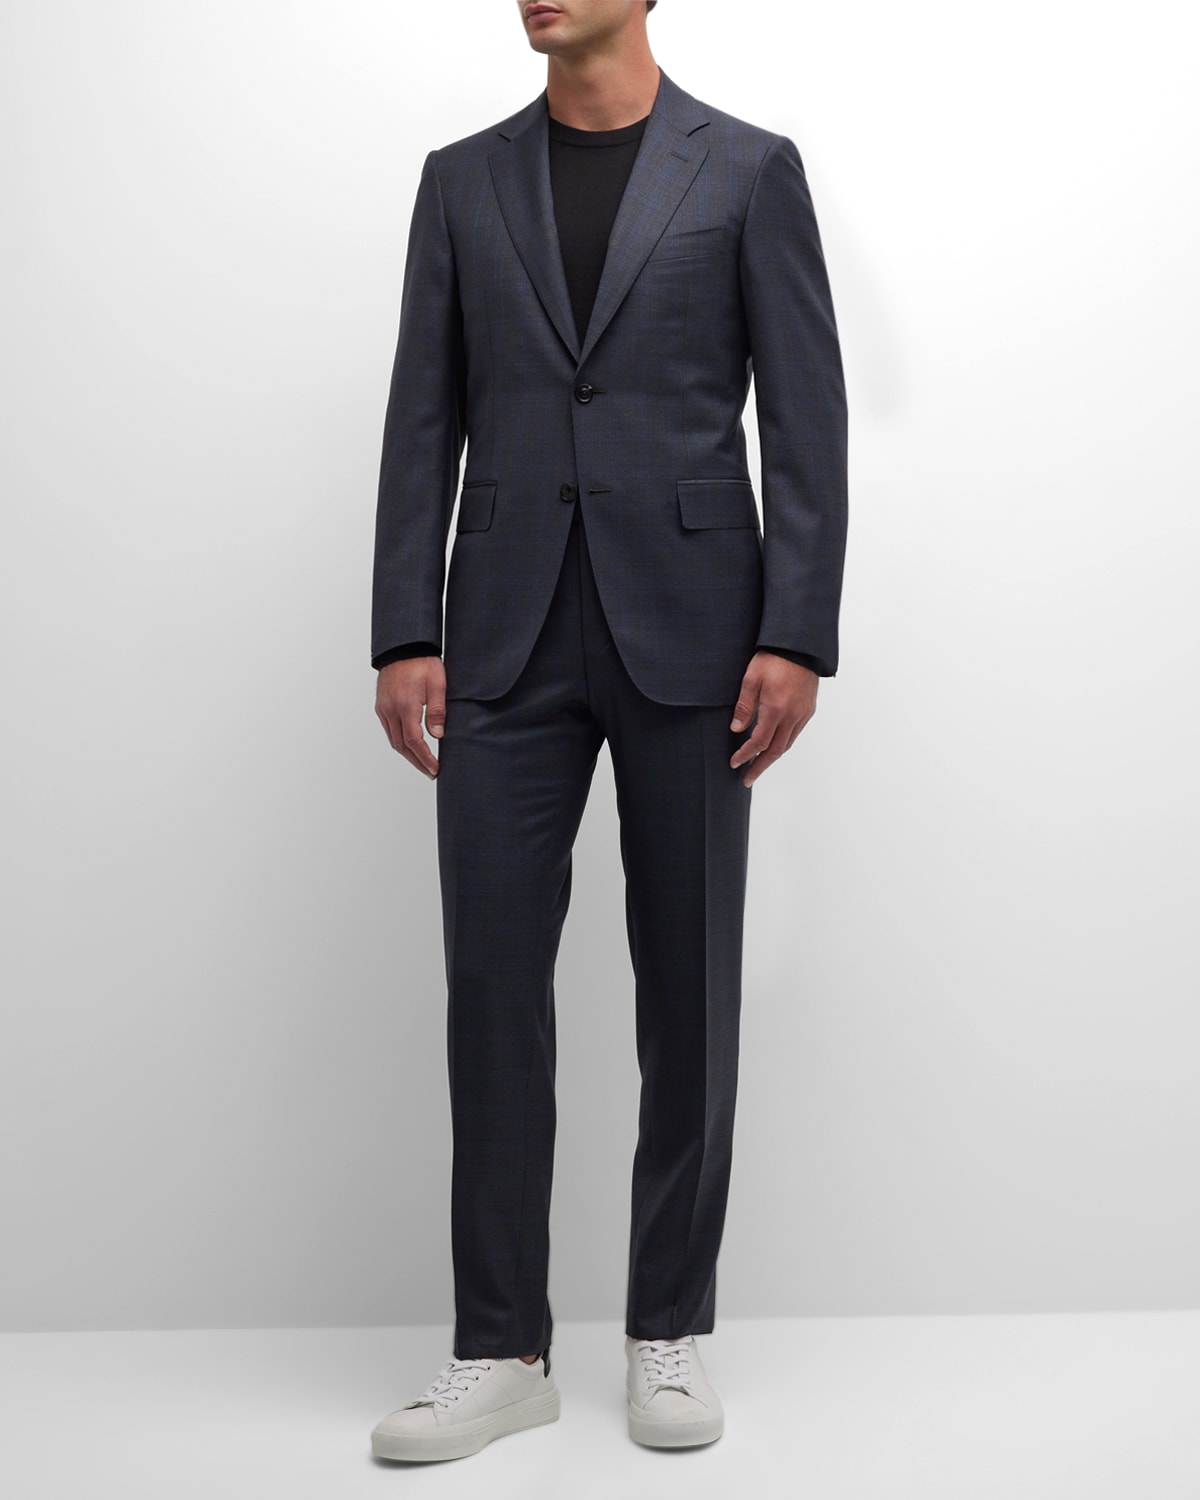 Canali Men's Plaid Wool Suit In Grey